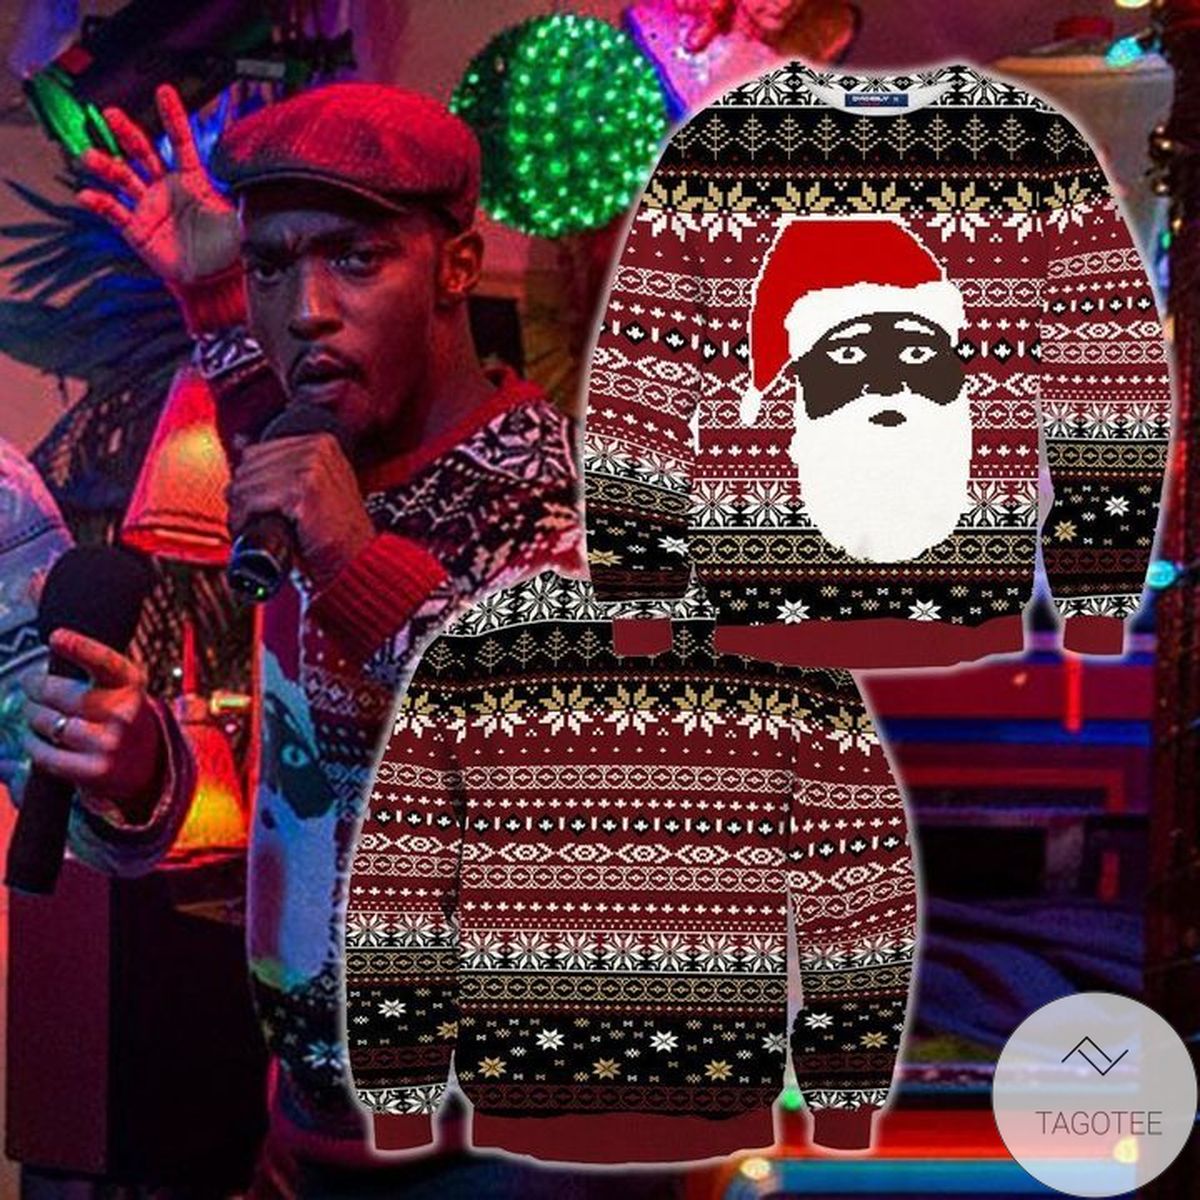 The Night Before Chris Ugly Christmas Sweater